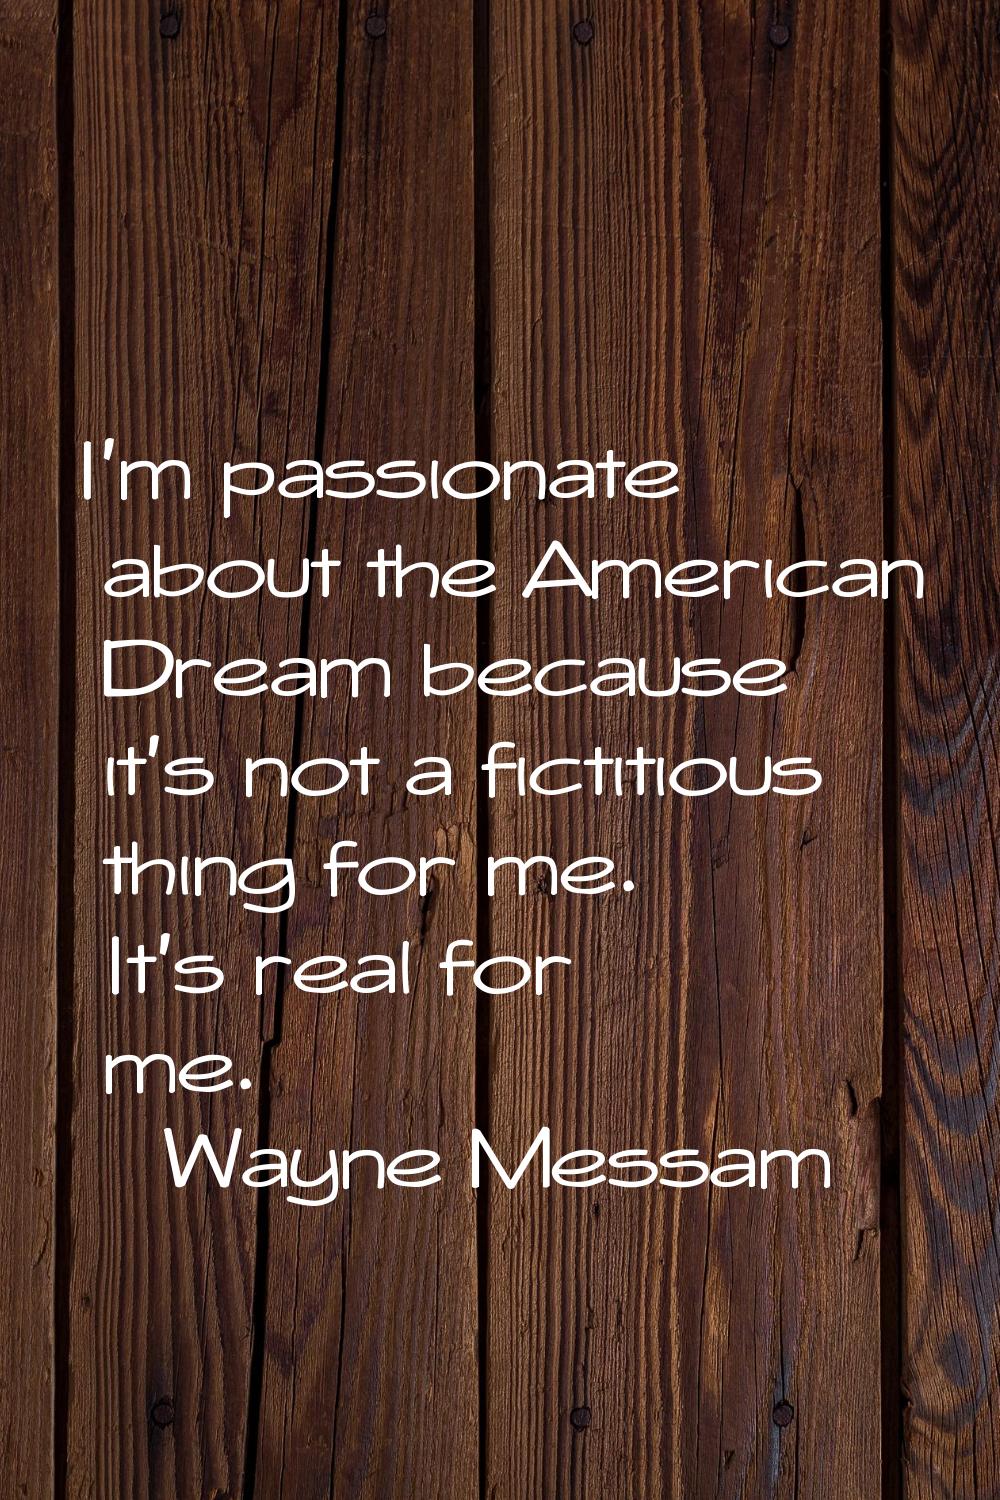 I'm passionate about the American Dream because it's not a fictitious thing for me. It's real for m